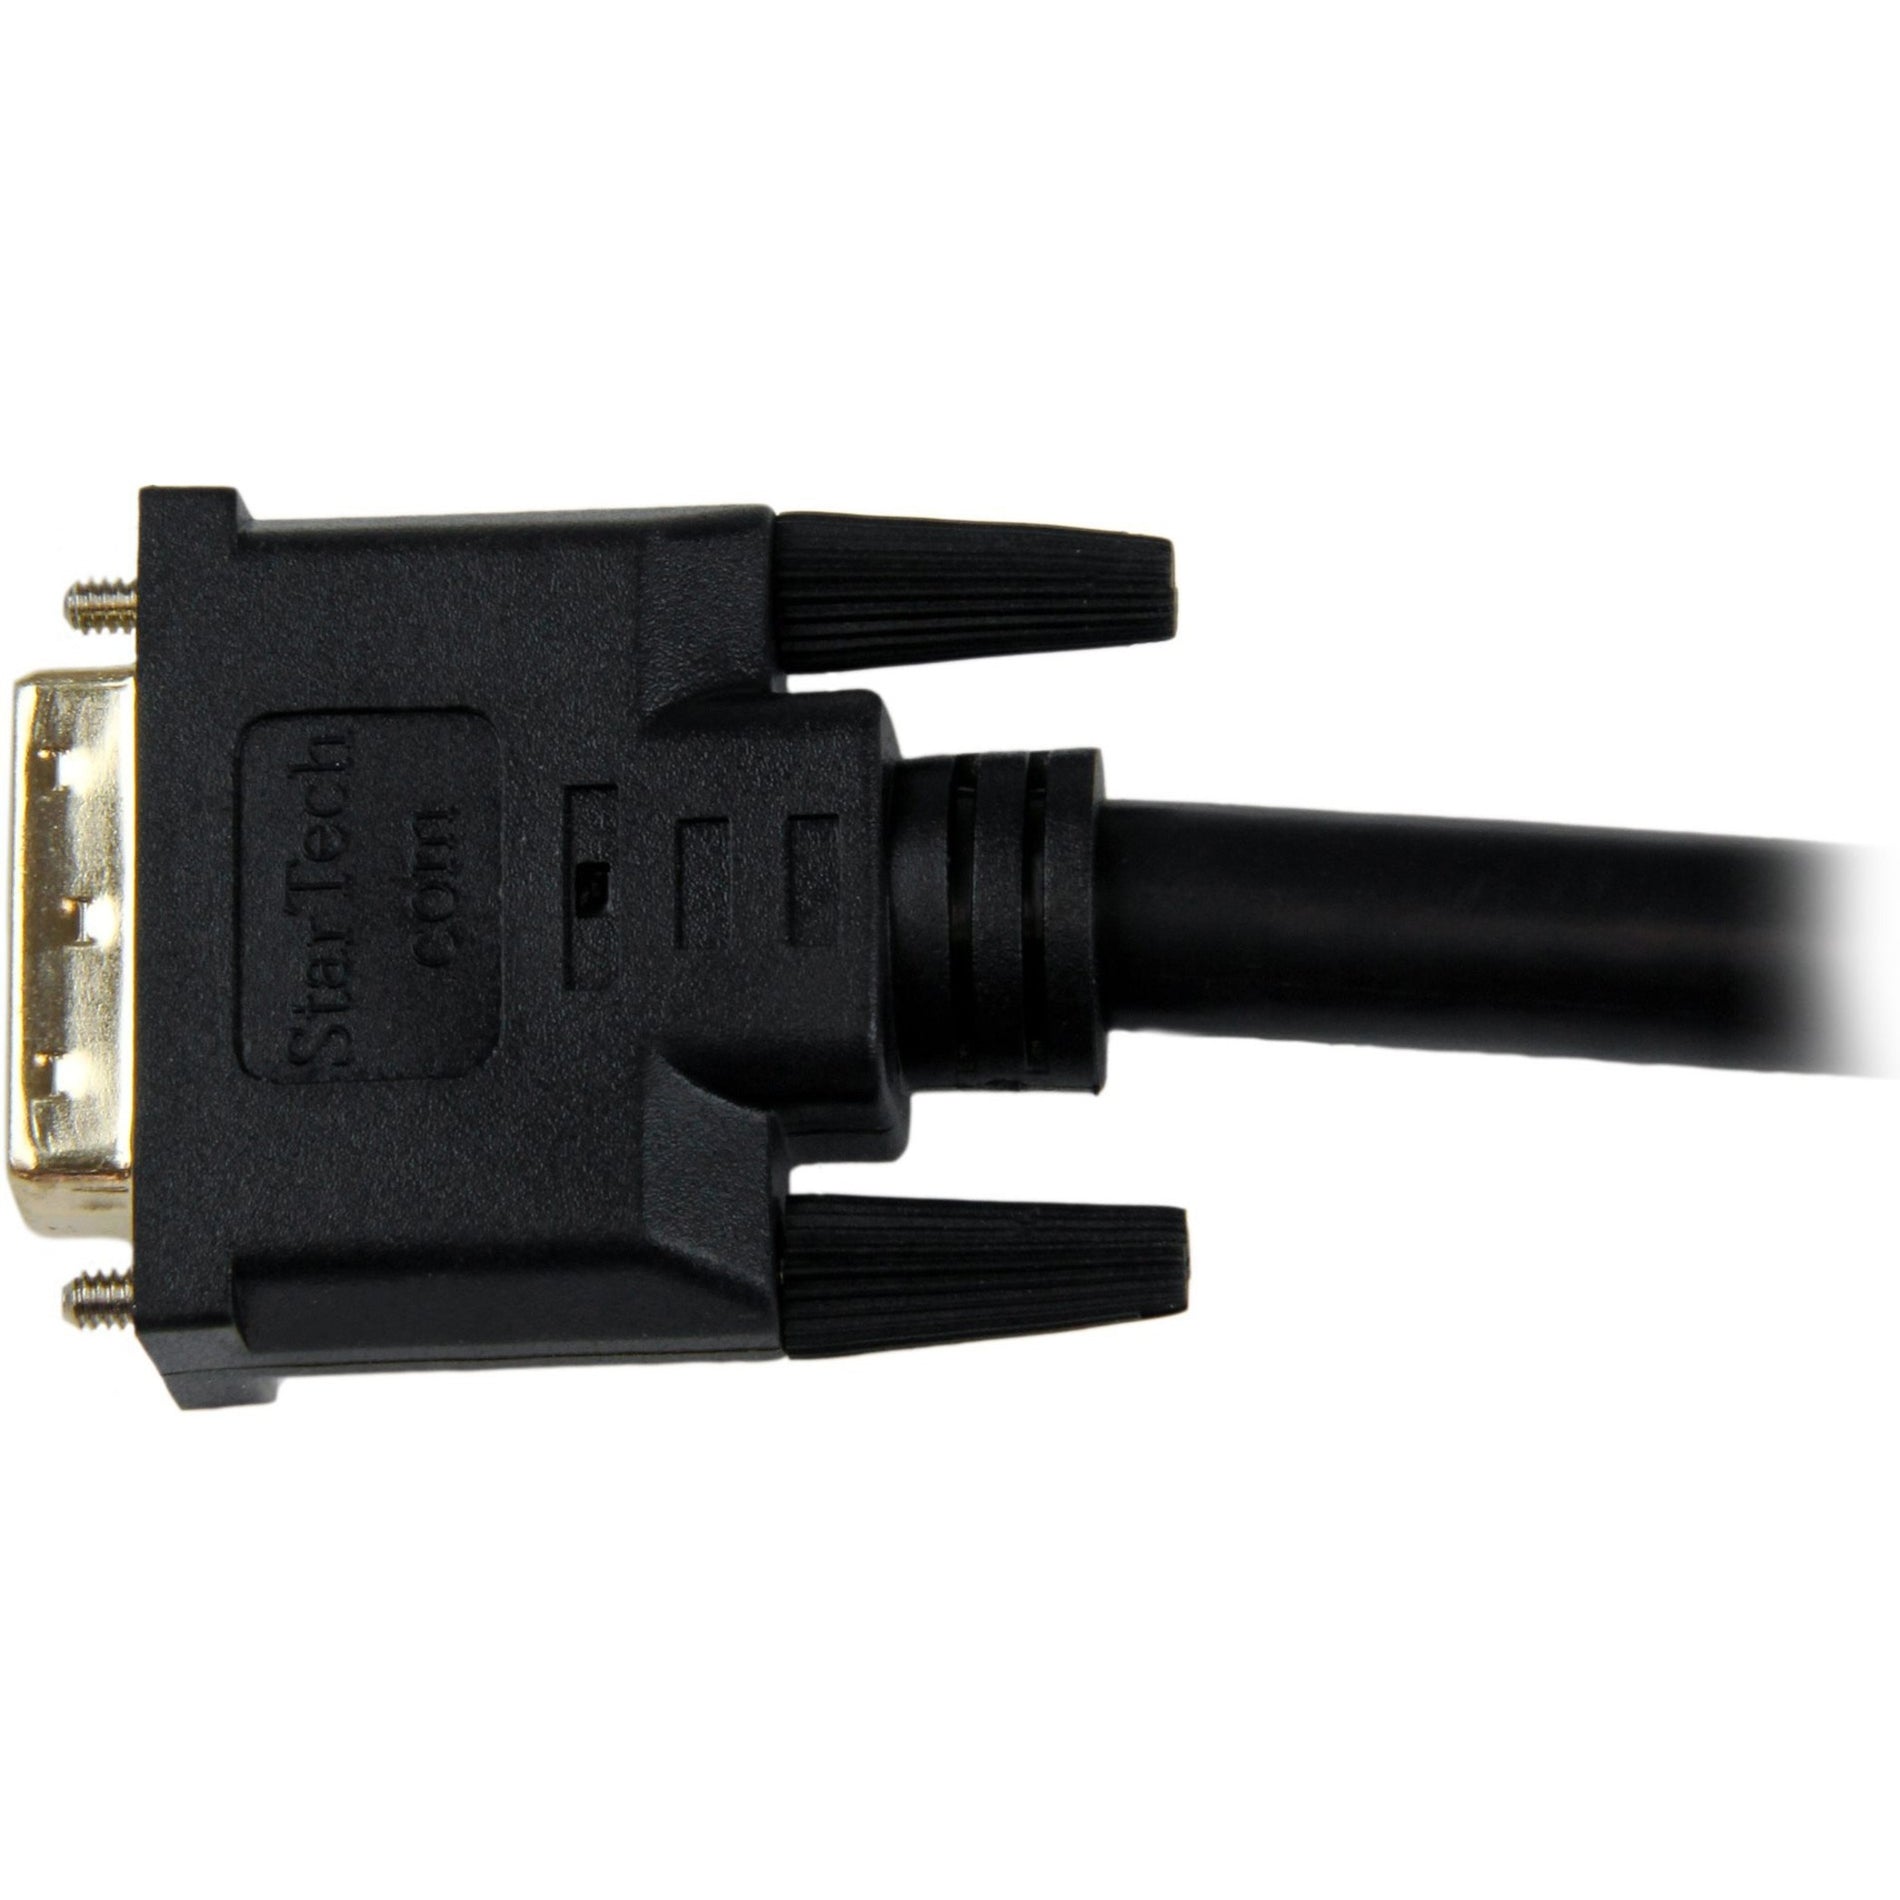 StarTech.com HDMIDVIMM30 30 ft HDMI to DVI-D Cable - M/M, Molded, Passive, Strain Relief, Copper Conductor, Shielded, 24 AWG, Nickel Plated Connectors, Black